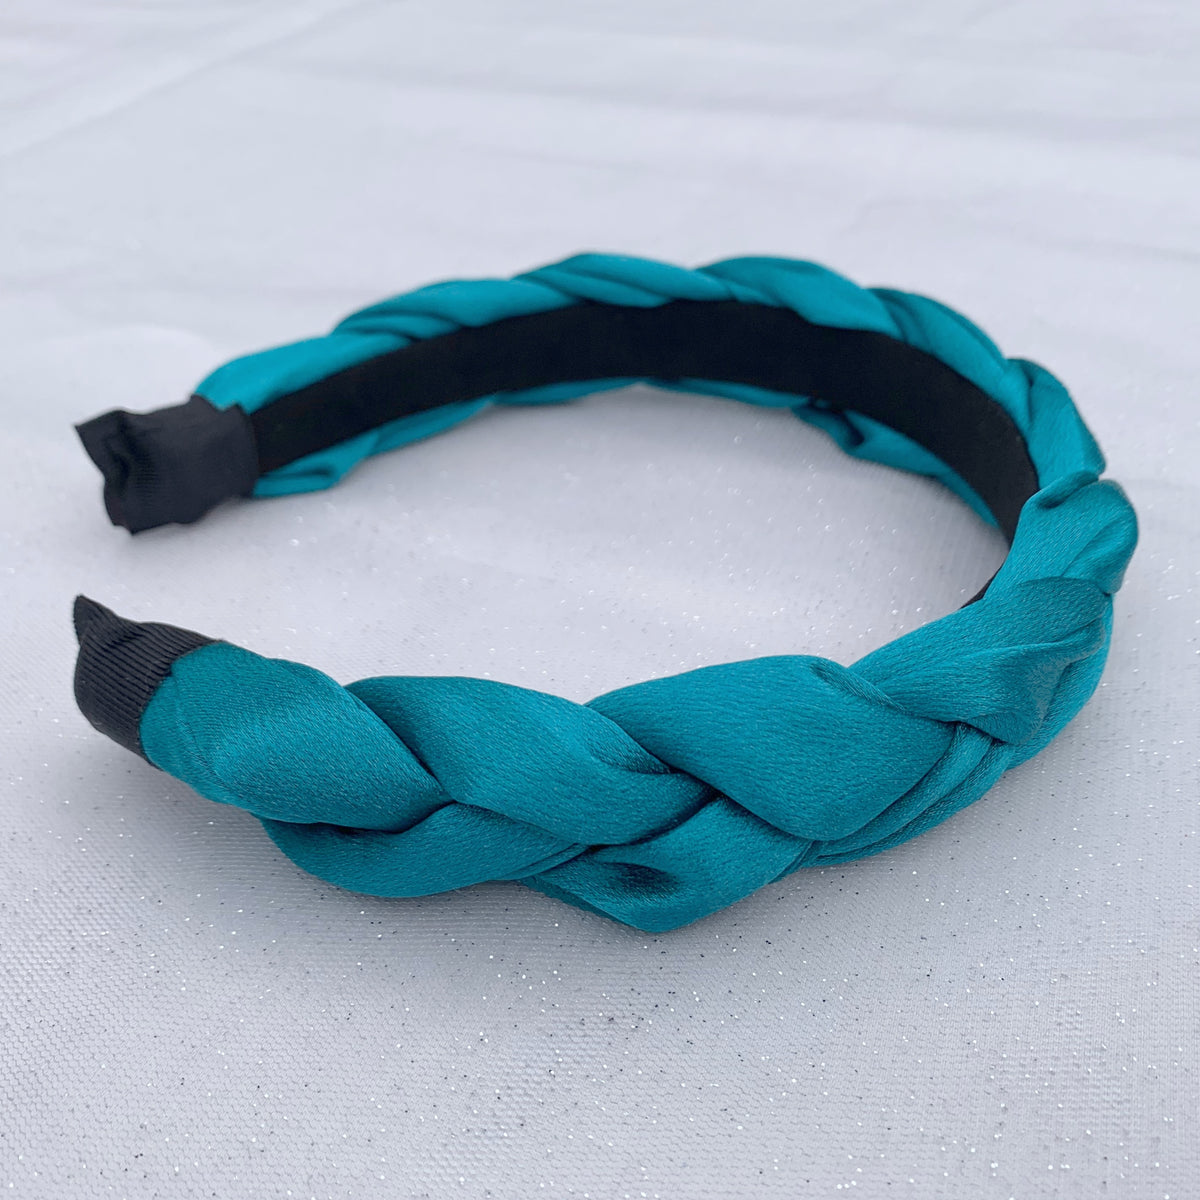 Accessories Turquoise Headband QueenMee Braided –